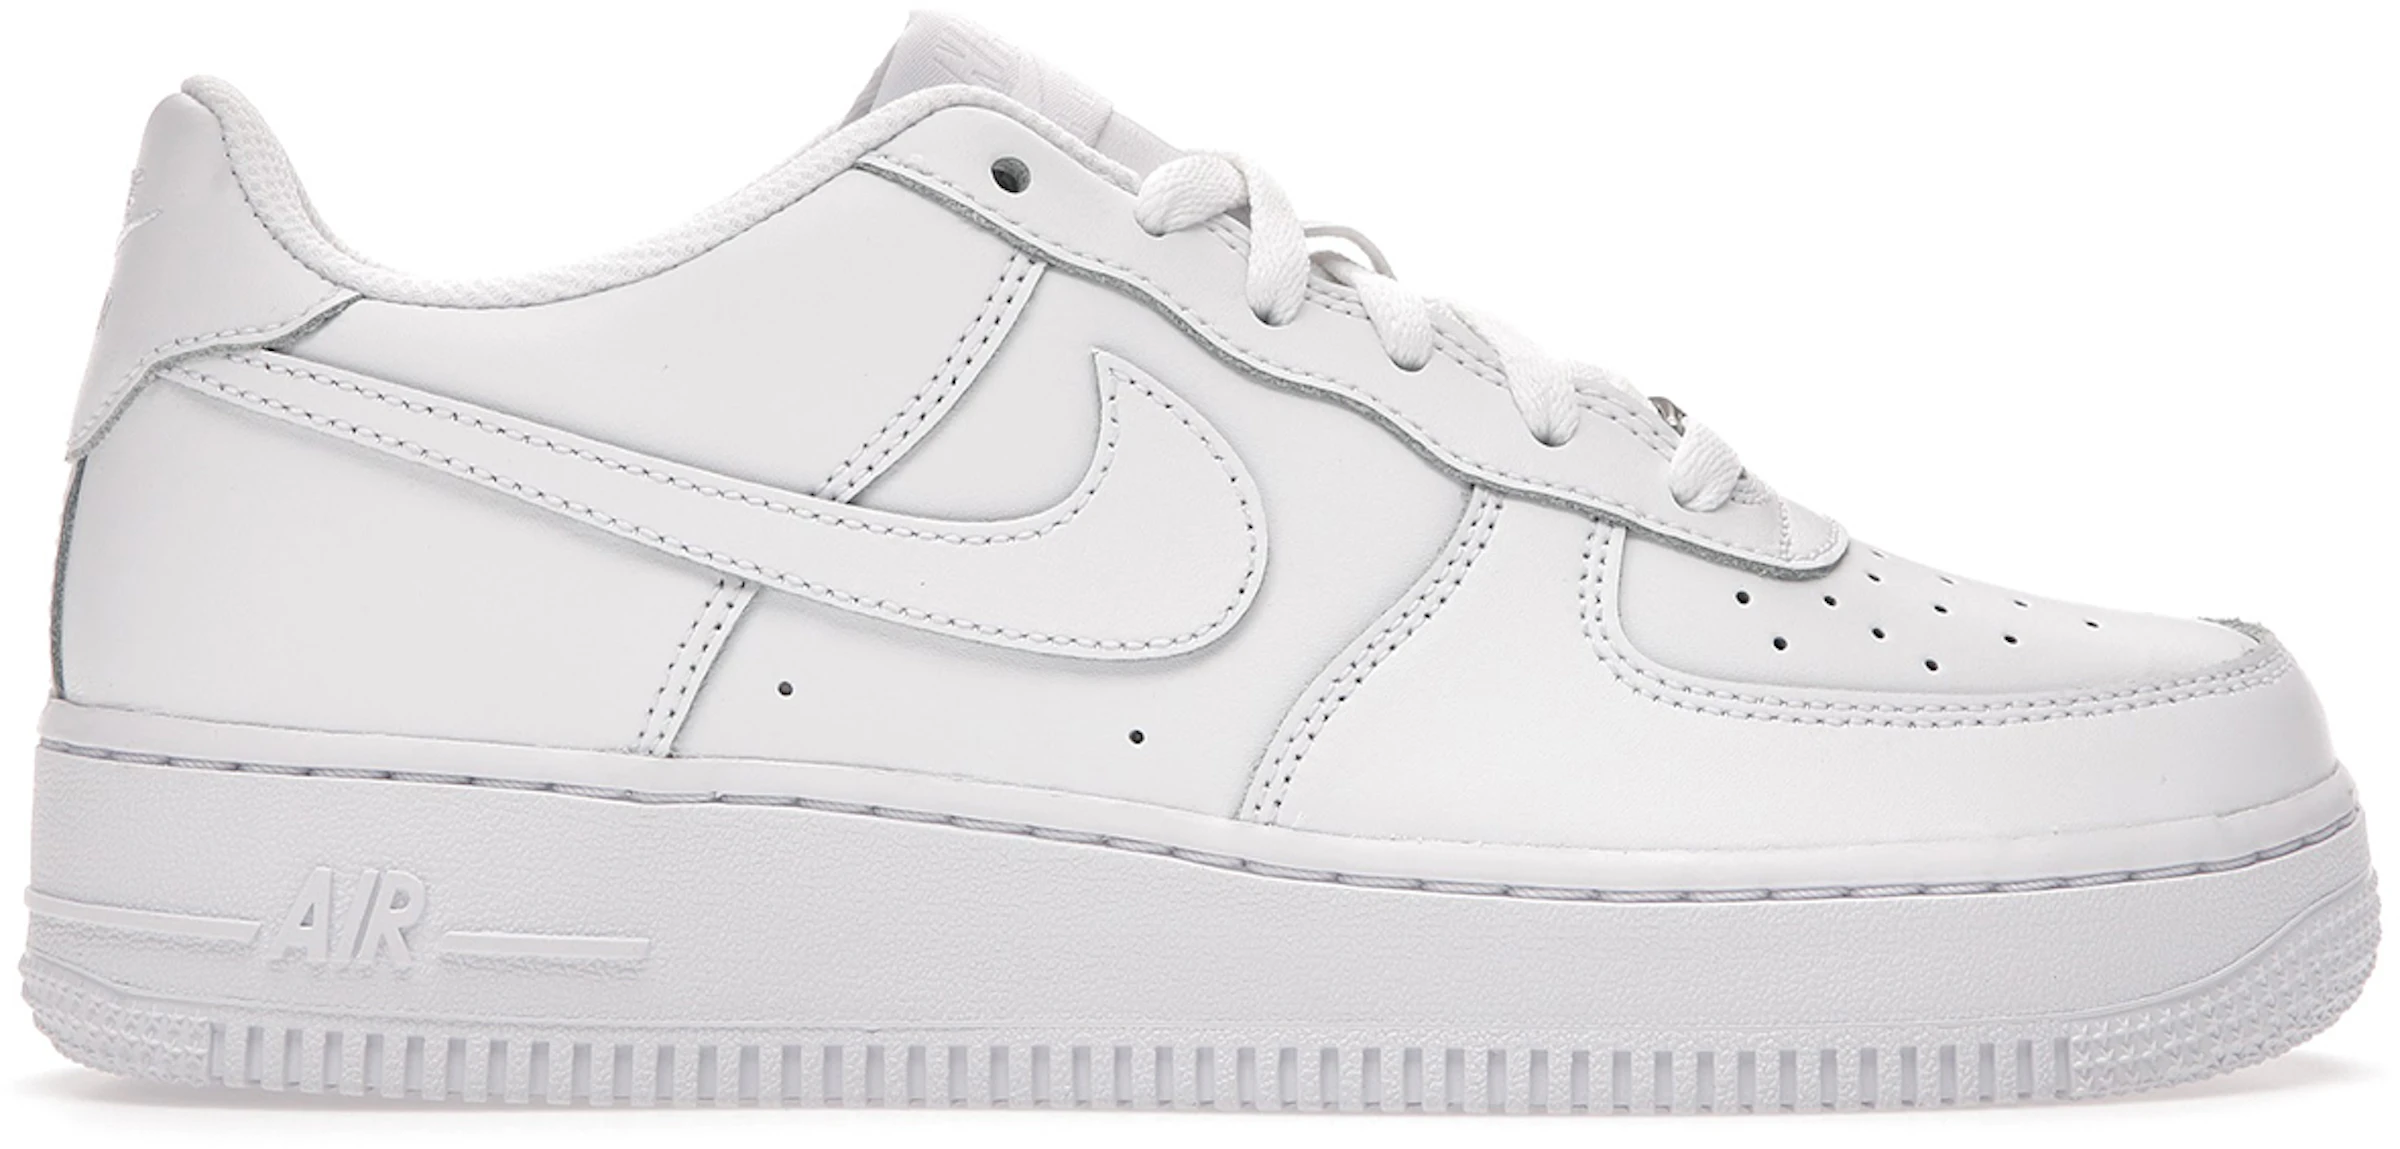 Compra Nike Air Force hombres y mujeres - StockX